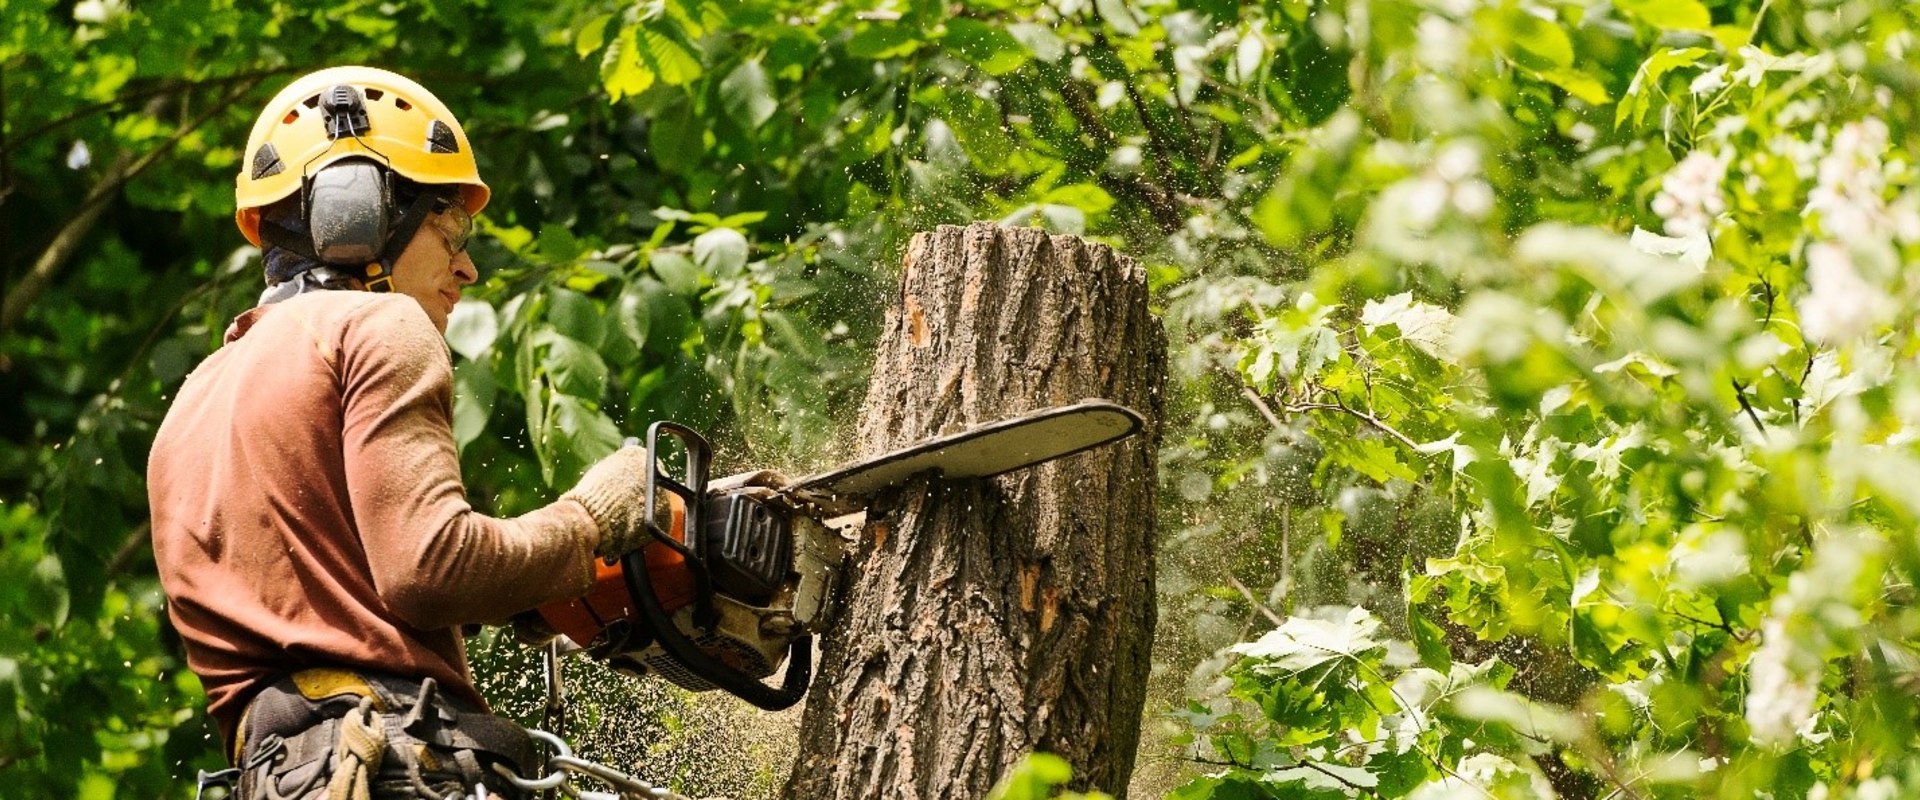 What is the difference between a horticulturist and an arborist?